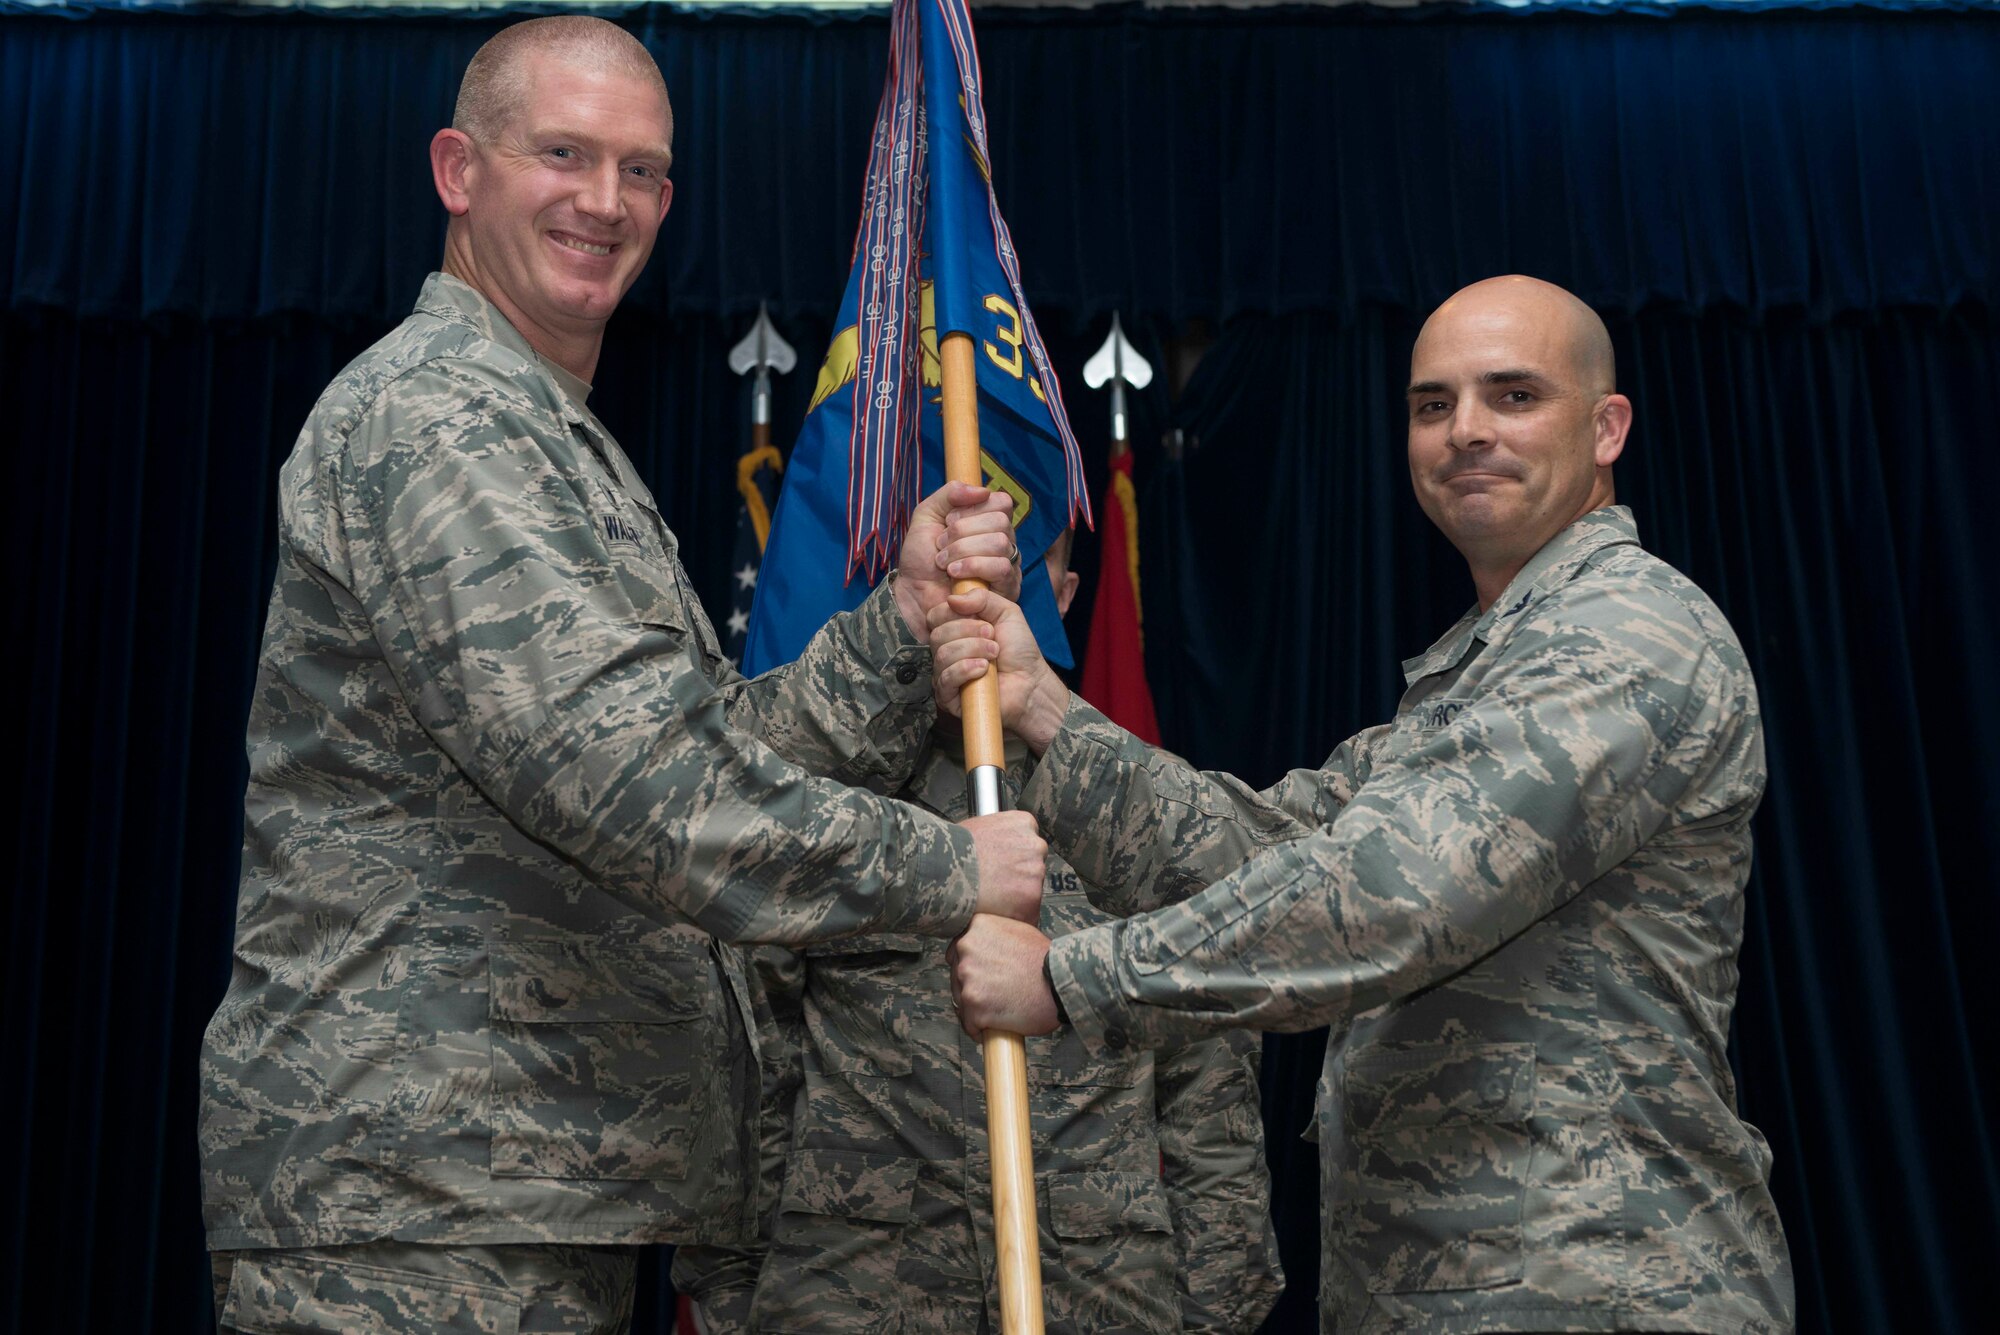 U.S. Air Force Col. Russell Voce, 39th Mission Support Group outgoing commander, relinquishes command to U.S. Air Force Col. John Walker, 39th Air Base Wing commander, during a change of command ceremony July 8, 2016, at Incirlik Air Base, Turkey. A change of command ceremony is a tradition that represents a formal transfer of authority and responsibility from the outgoing commander to the incoming commander. (U.S. Air Force photo by Senior Airman John Nieves Camacho/Released)